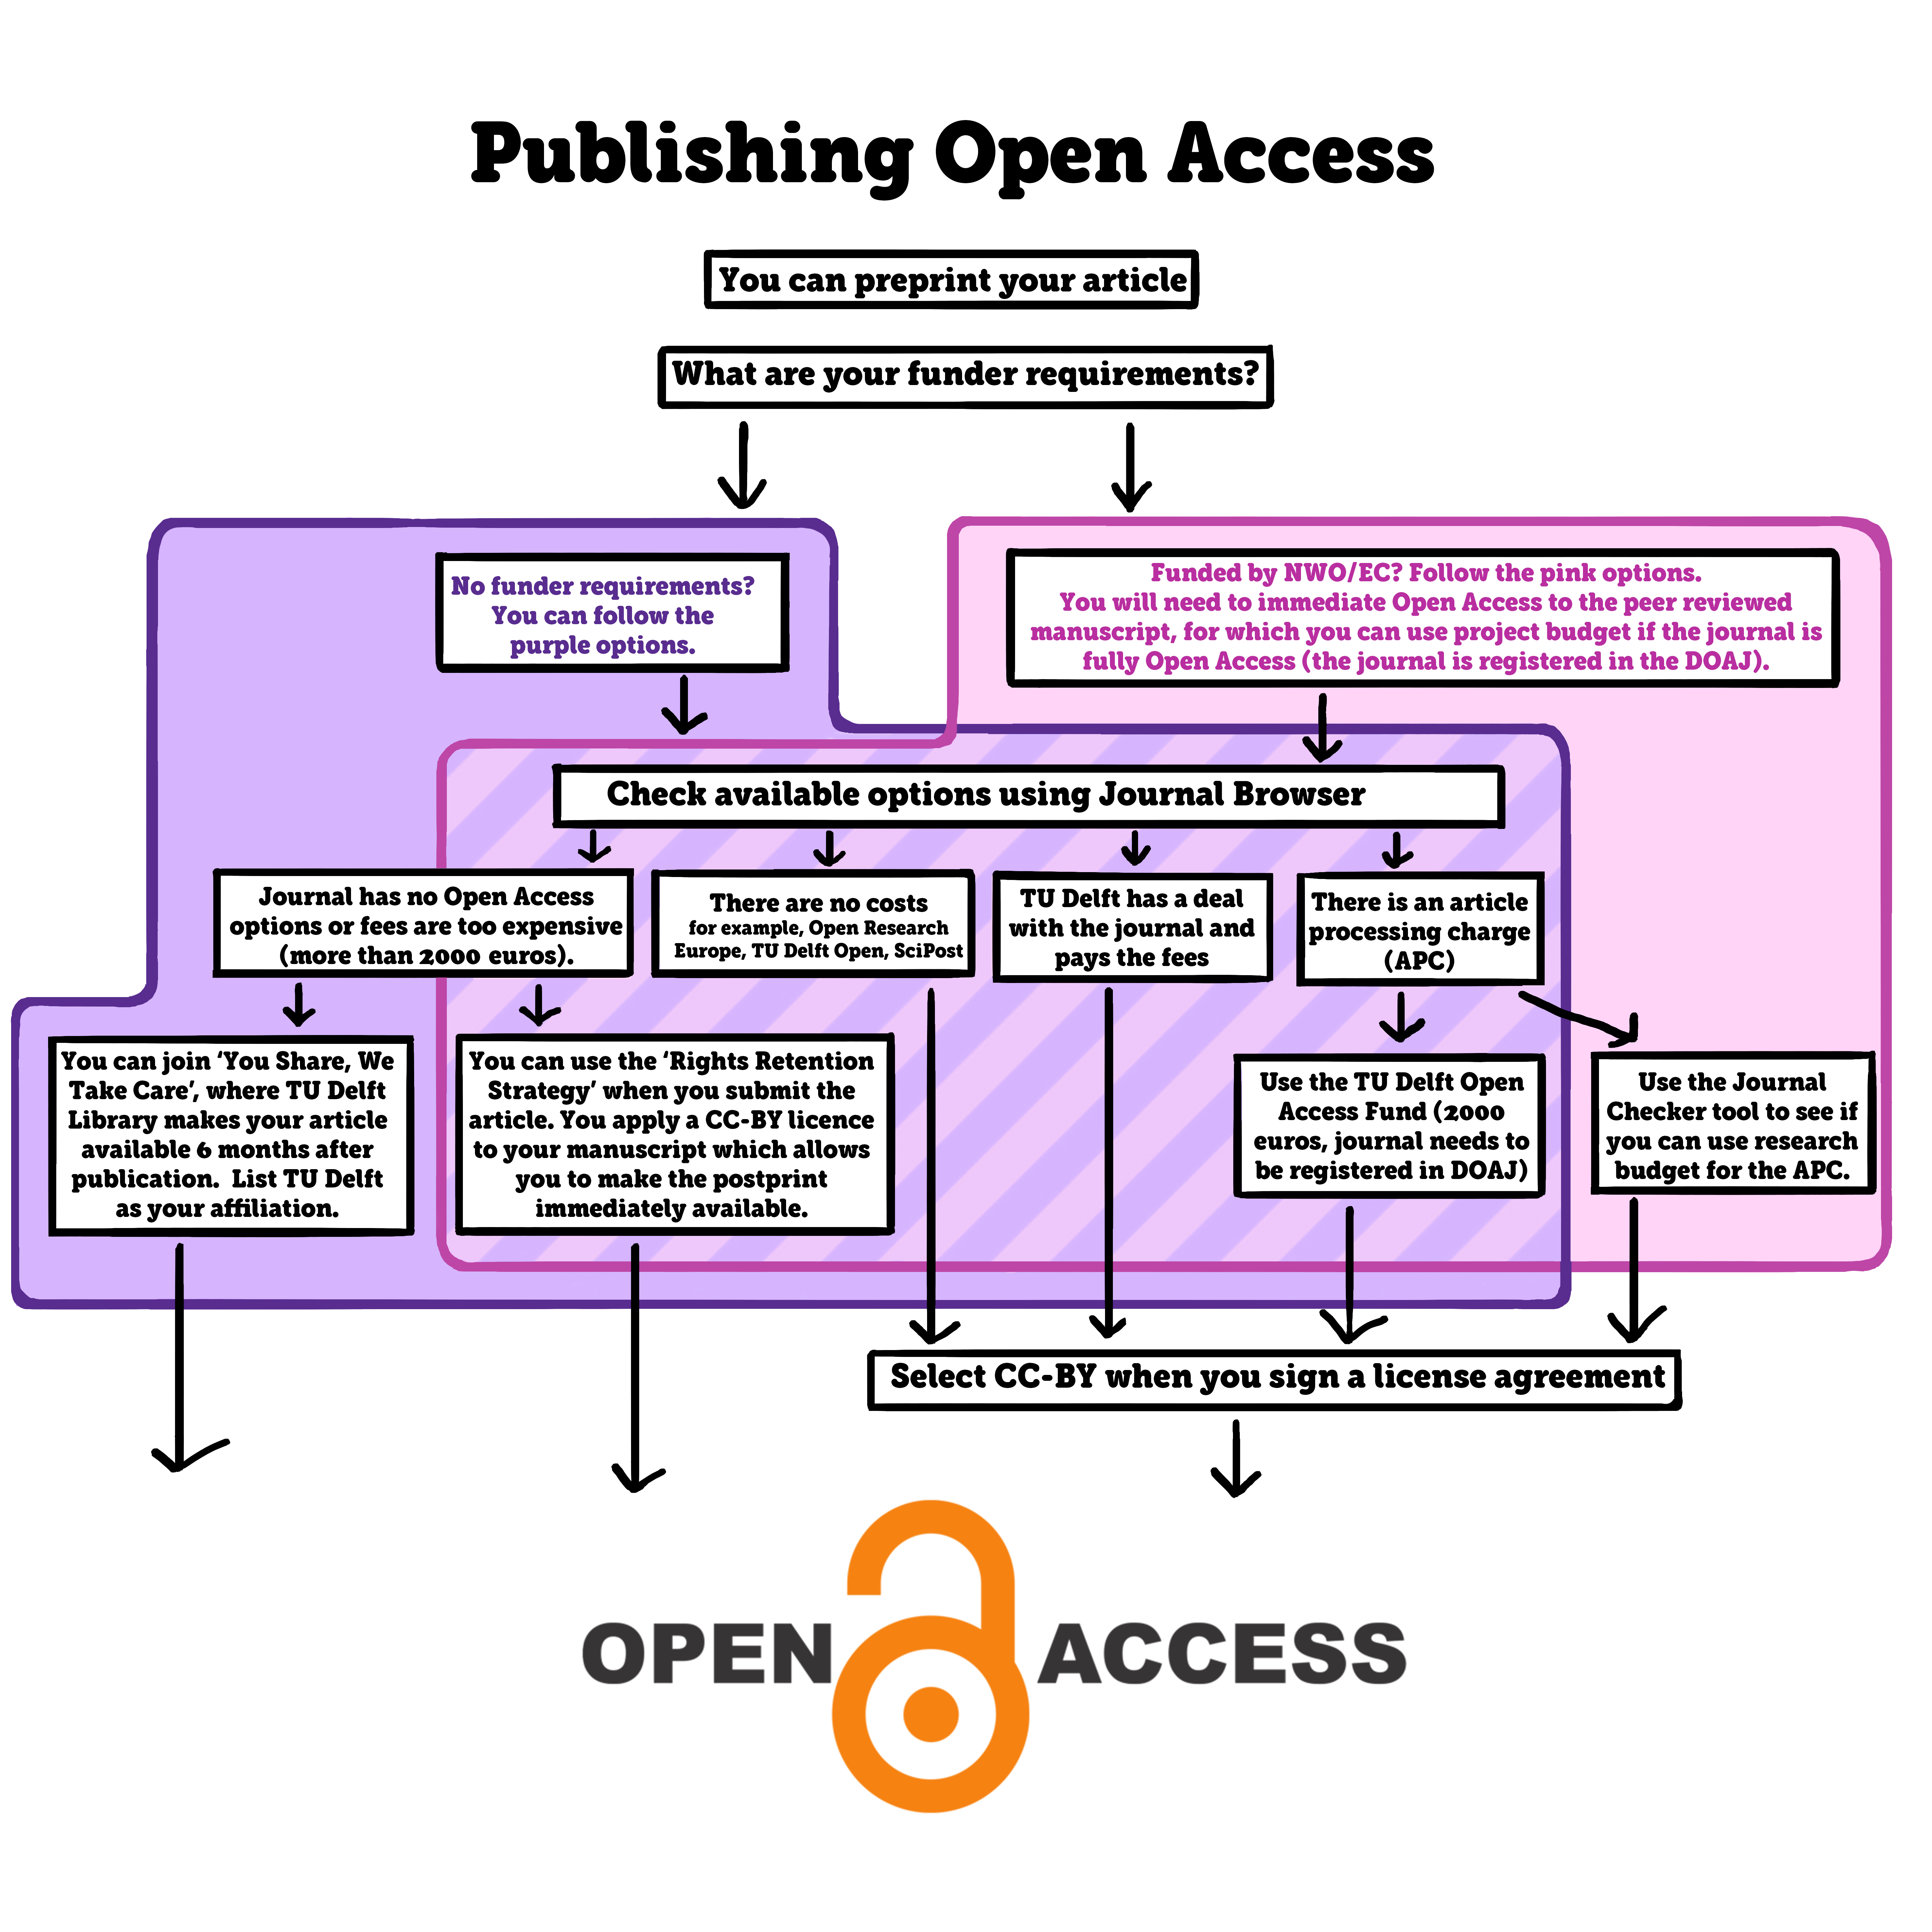 Publishing Open Access flowchart. You can preprint your article. The rest of the workflow depends on whether you have funder requirements or not. If you do not have funder requirements you can join 'You Share, We Take Care', where TU Delft library makes the article available 6 months after publication when you list TU Delft as your affiliation. This is not compliant with many funder requirements. On the other hand, if you do not have a funder it will be difficult to use budget to pay for the article processing fees. Whether you have a funder or not you have several options available that you can check using the Journal Browser. This website allows you to check whether your preferred journal is Open Access or not, what costs there are, whether TU Delft has a deal with the journal of whether there is an article processing charge that you need to pay. You can use the Rigths Retention Strategy if there are no Open Access options available or if the article processing charges are too expensive. You can use the TU Delft Open Access Fund of 2000 euro's if the journal is fully Open Access, which you can check using the DOAJ. You can also use the Journal checker tool to see if you can use research budget for the charges. Always select CC-BY when you sign a license agreement. This is how you can make your article available open access!